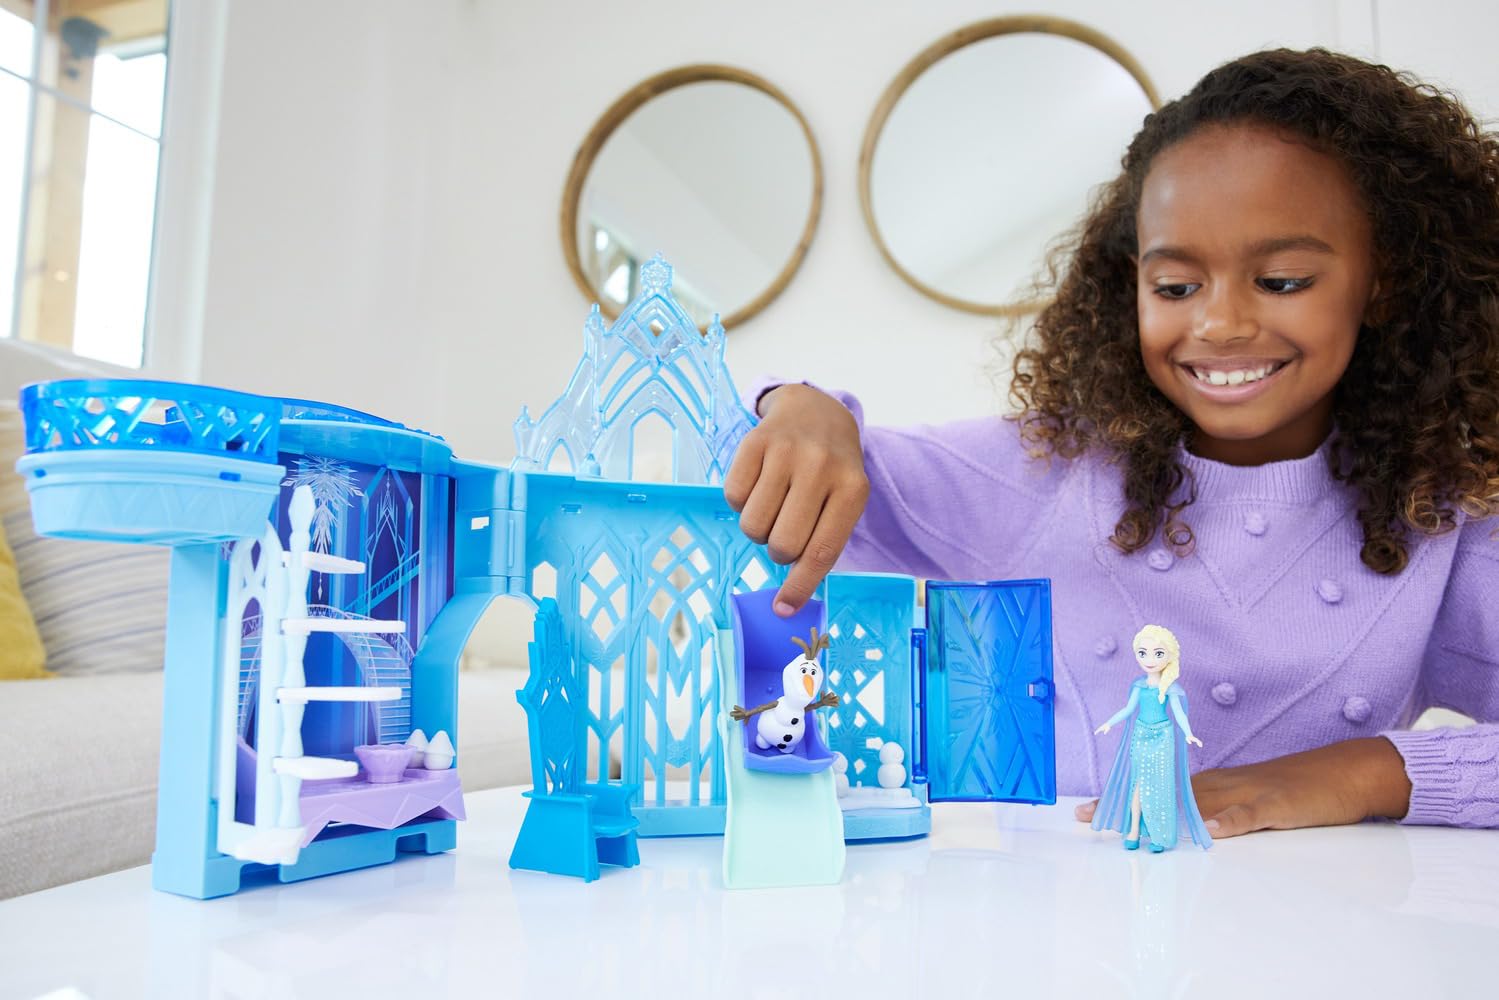 Mattel Disney Frozen Toys, Elsa Ice Palace Storytime Stackers, Castle Doll House Playset with Small Doll & 8 Accessories,Blue